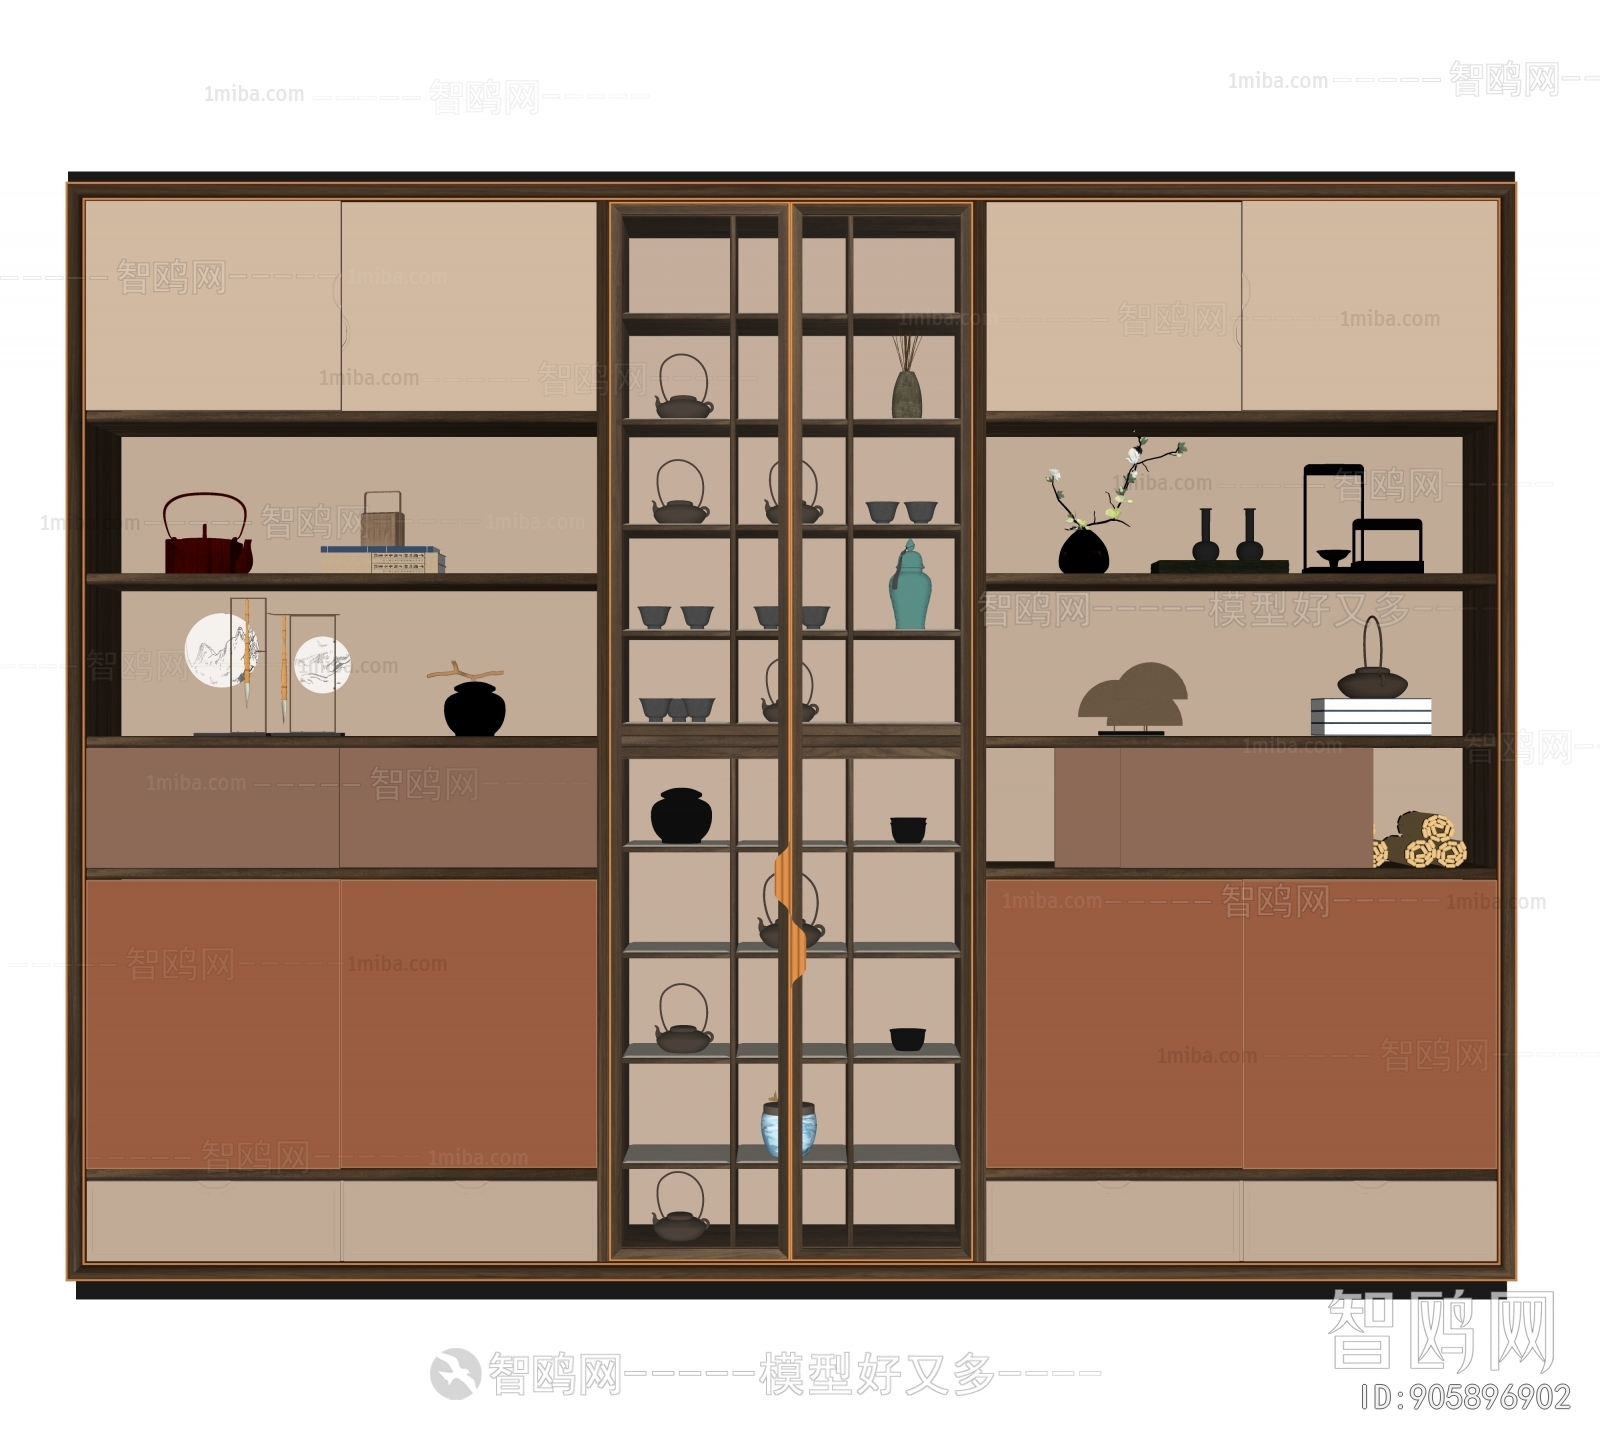 New Chinese Style Other Cabinets And Shelves